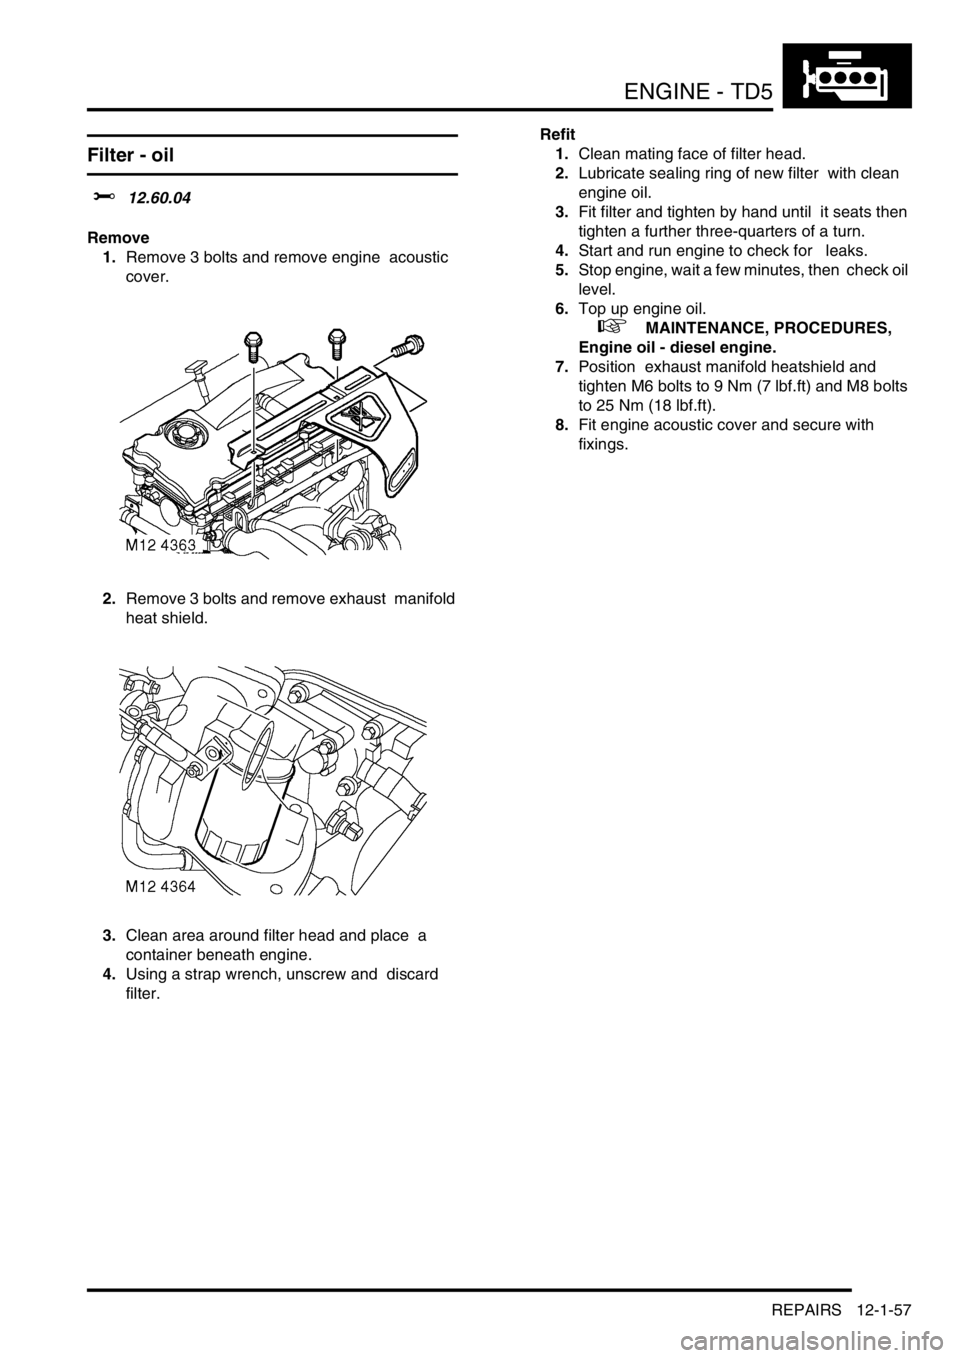 LAND ROVER DISCOVERY 2002  Workshop Manual ENGINE - TD5
REPAIRS 12-1-57
Filter - oil 
$% 12.60.04 
Remove
1.Remove 3 bolts and remove engine  acoustic 
cover. 
2.Remove 3 bolts and remove exhaust  manifold 
heat shield. 
3.Clean area around fi